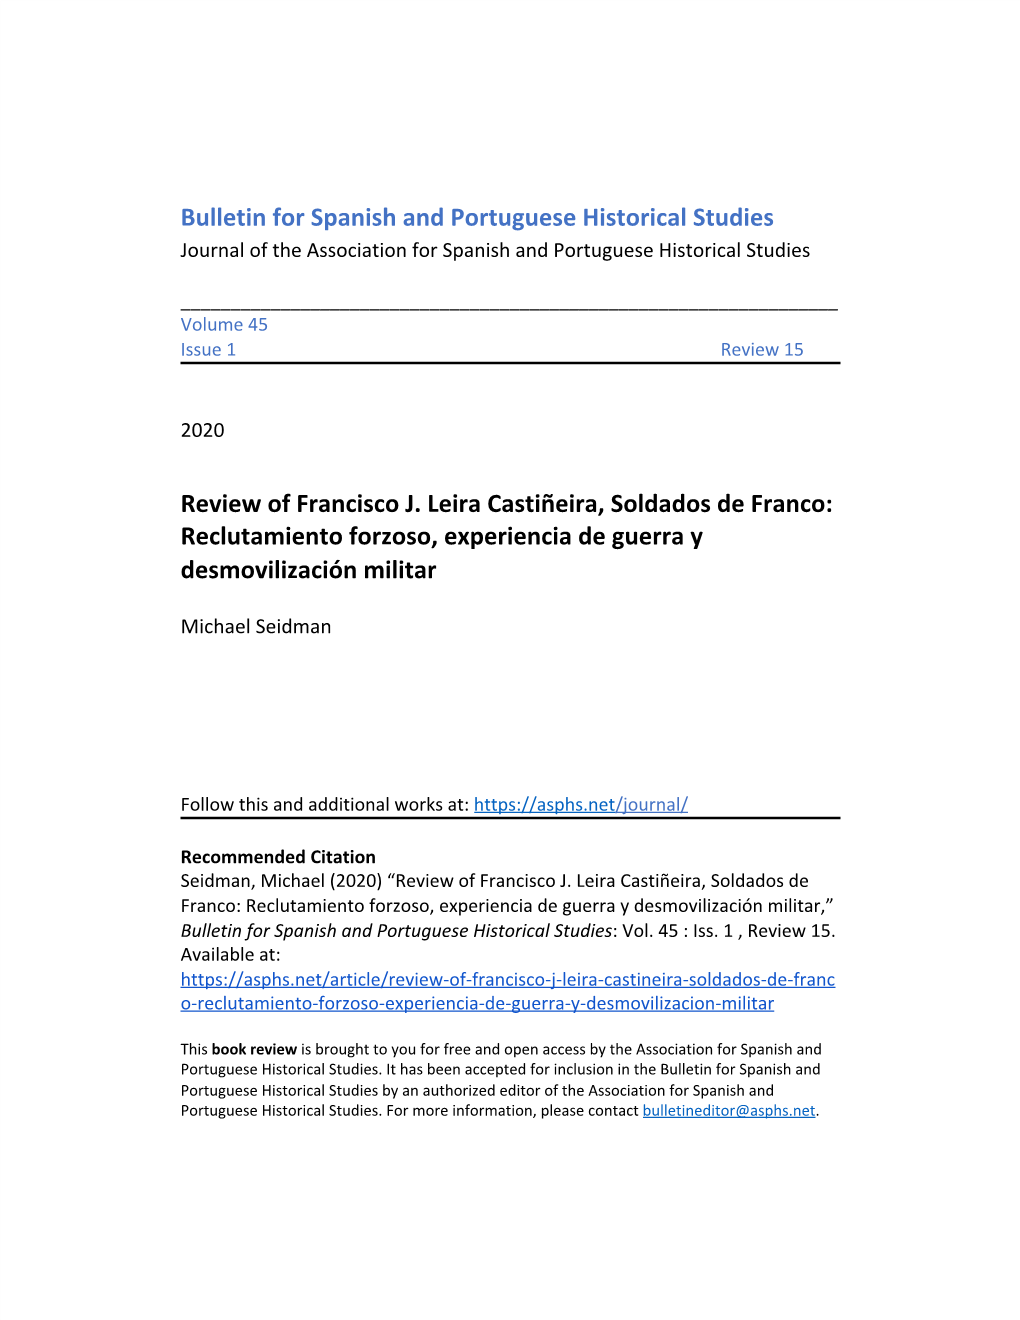 Bulletin for Spanish and Portuguese Historical Studies Review Of